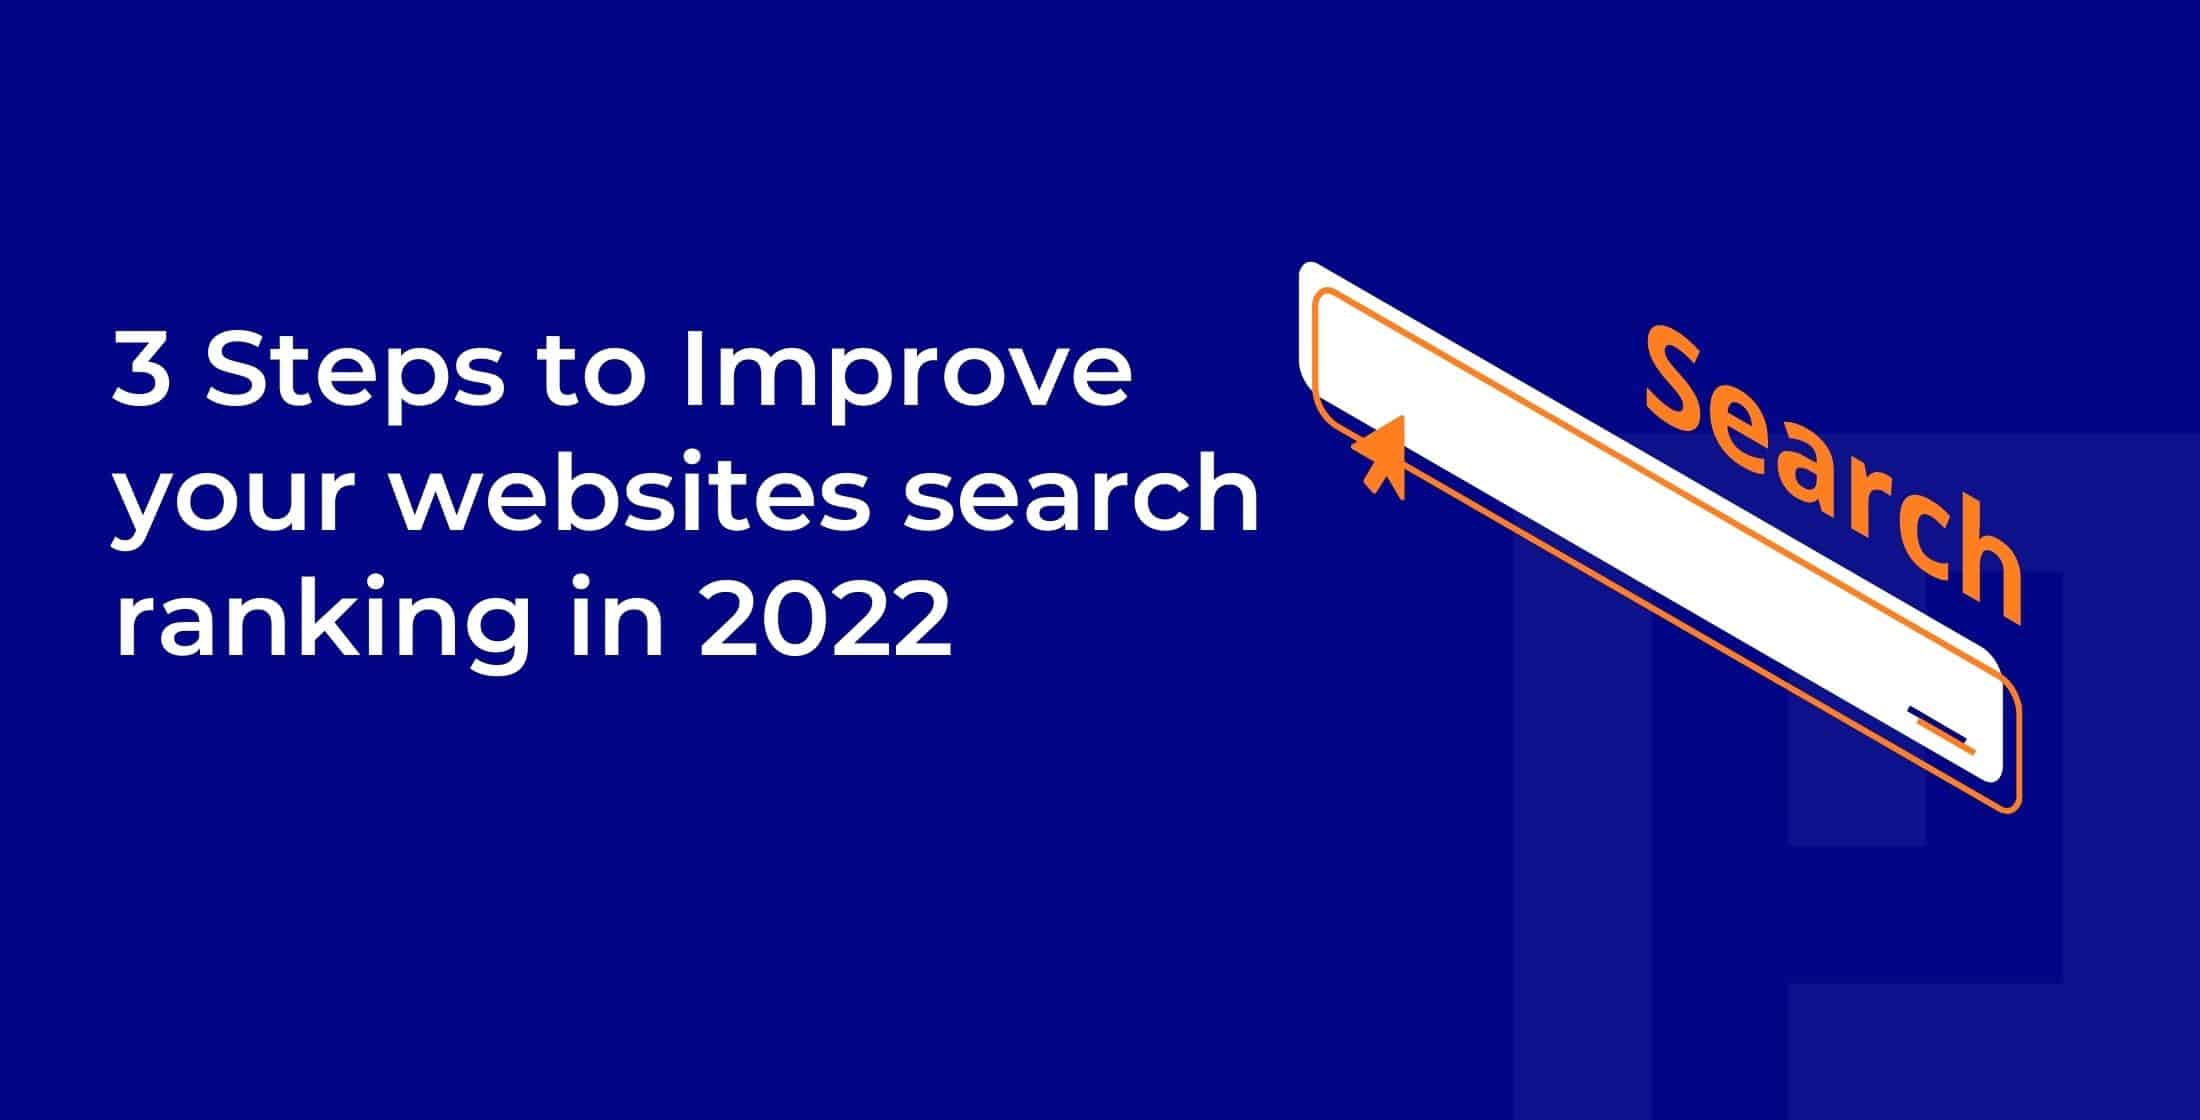 We want to help your business improve its website search ranking with some simple steps.